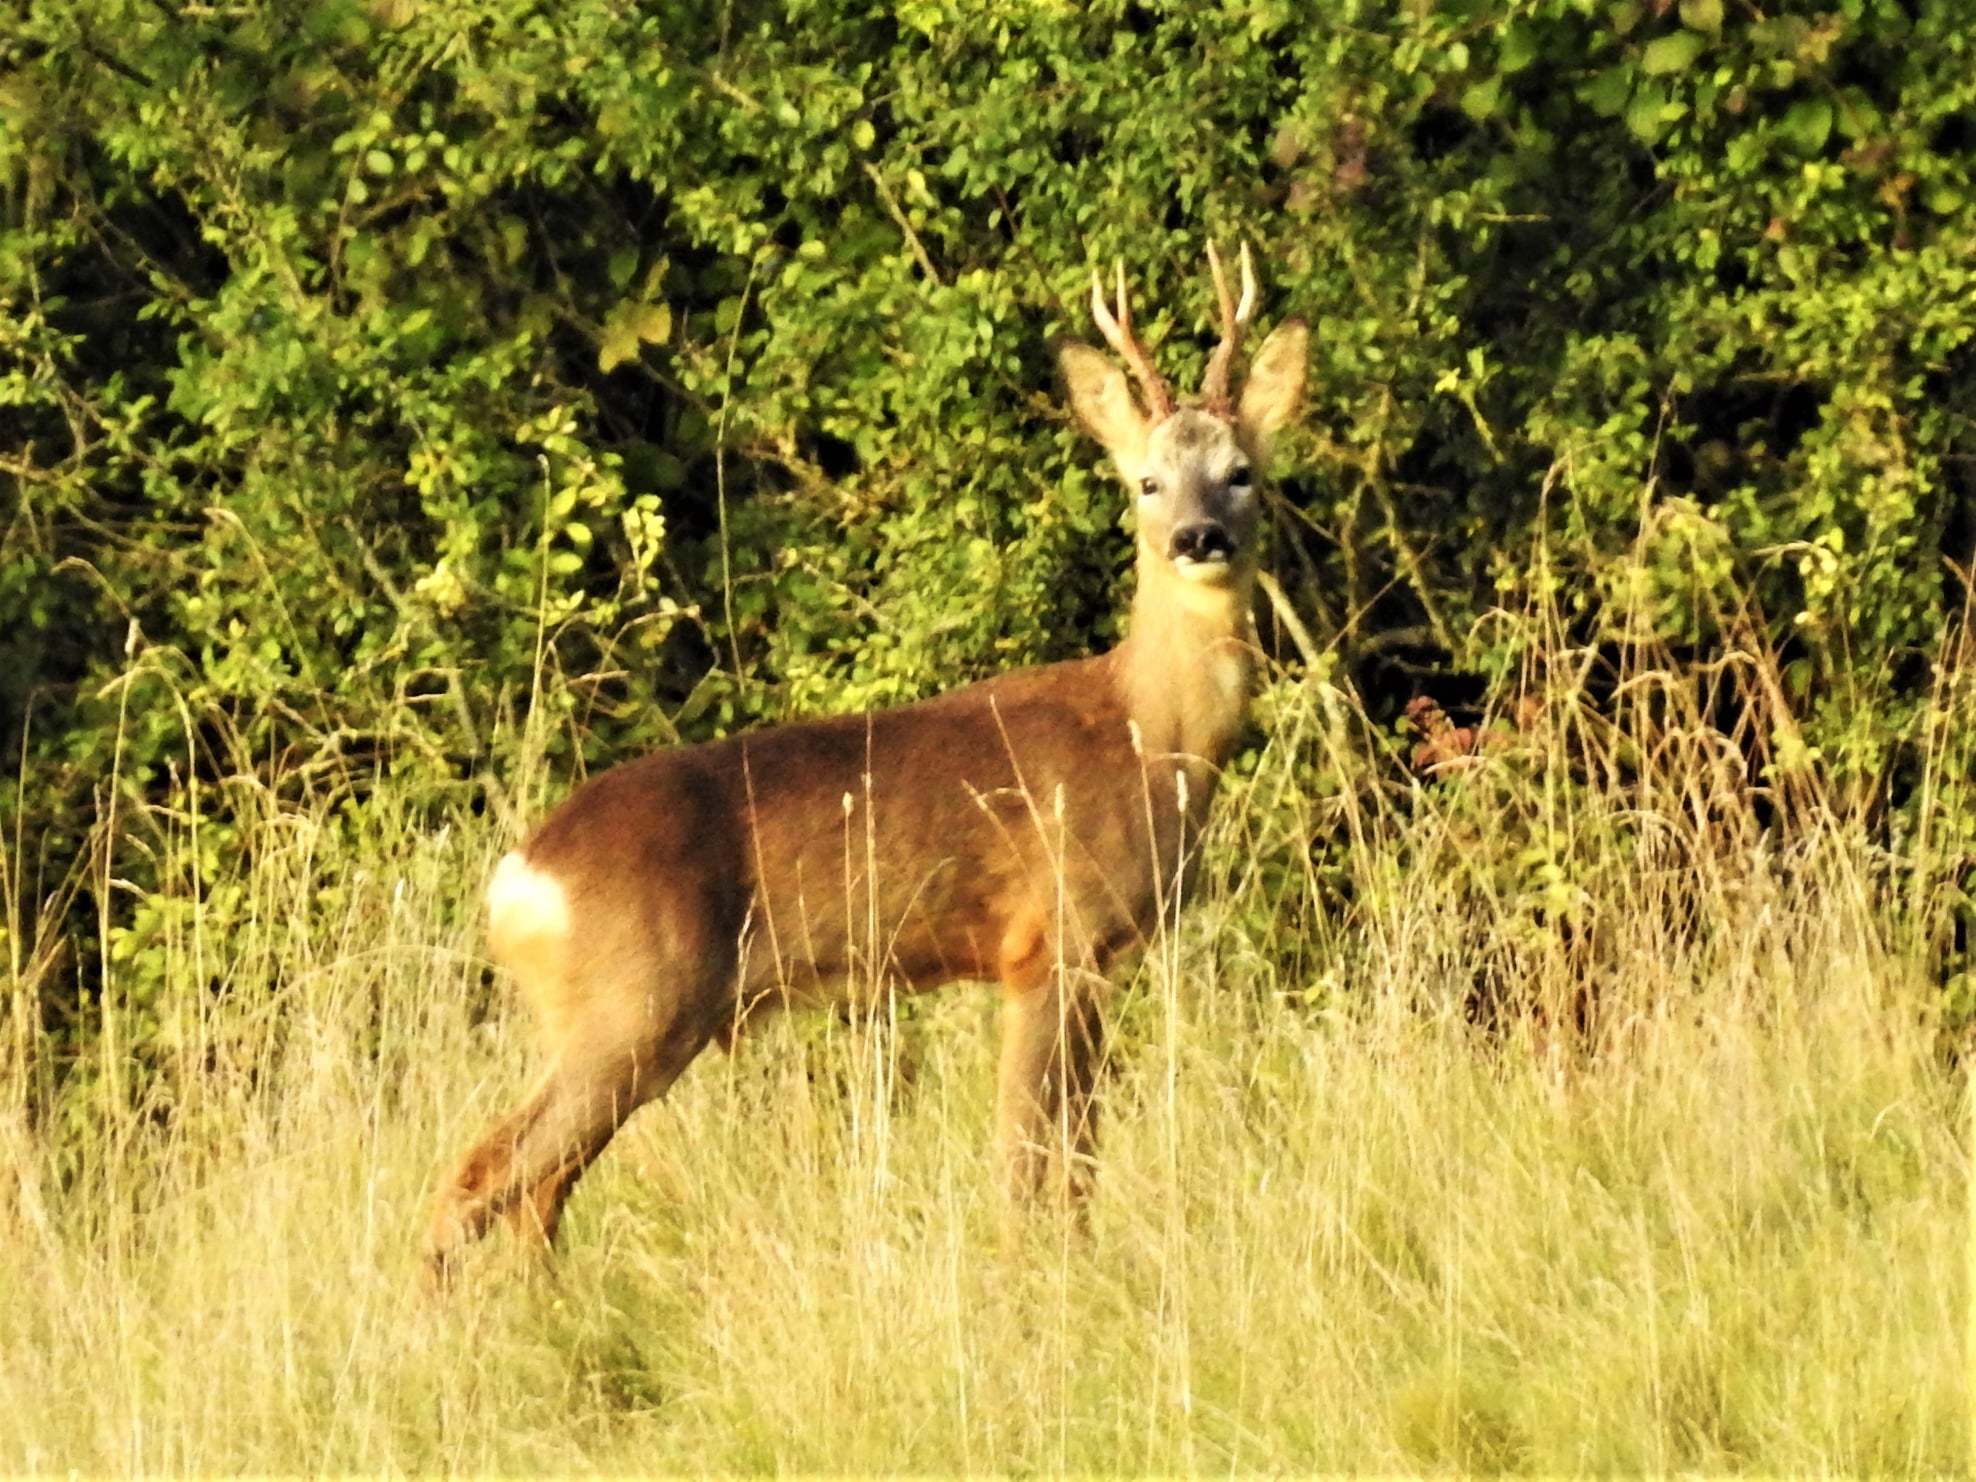 This deer was posing for the camera (Anne Rixon)